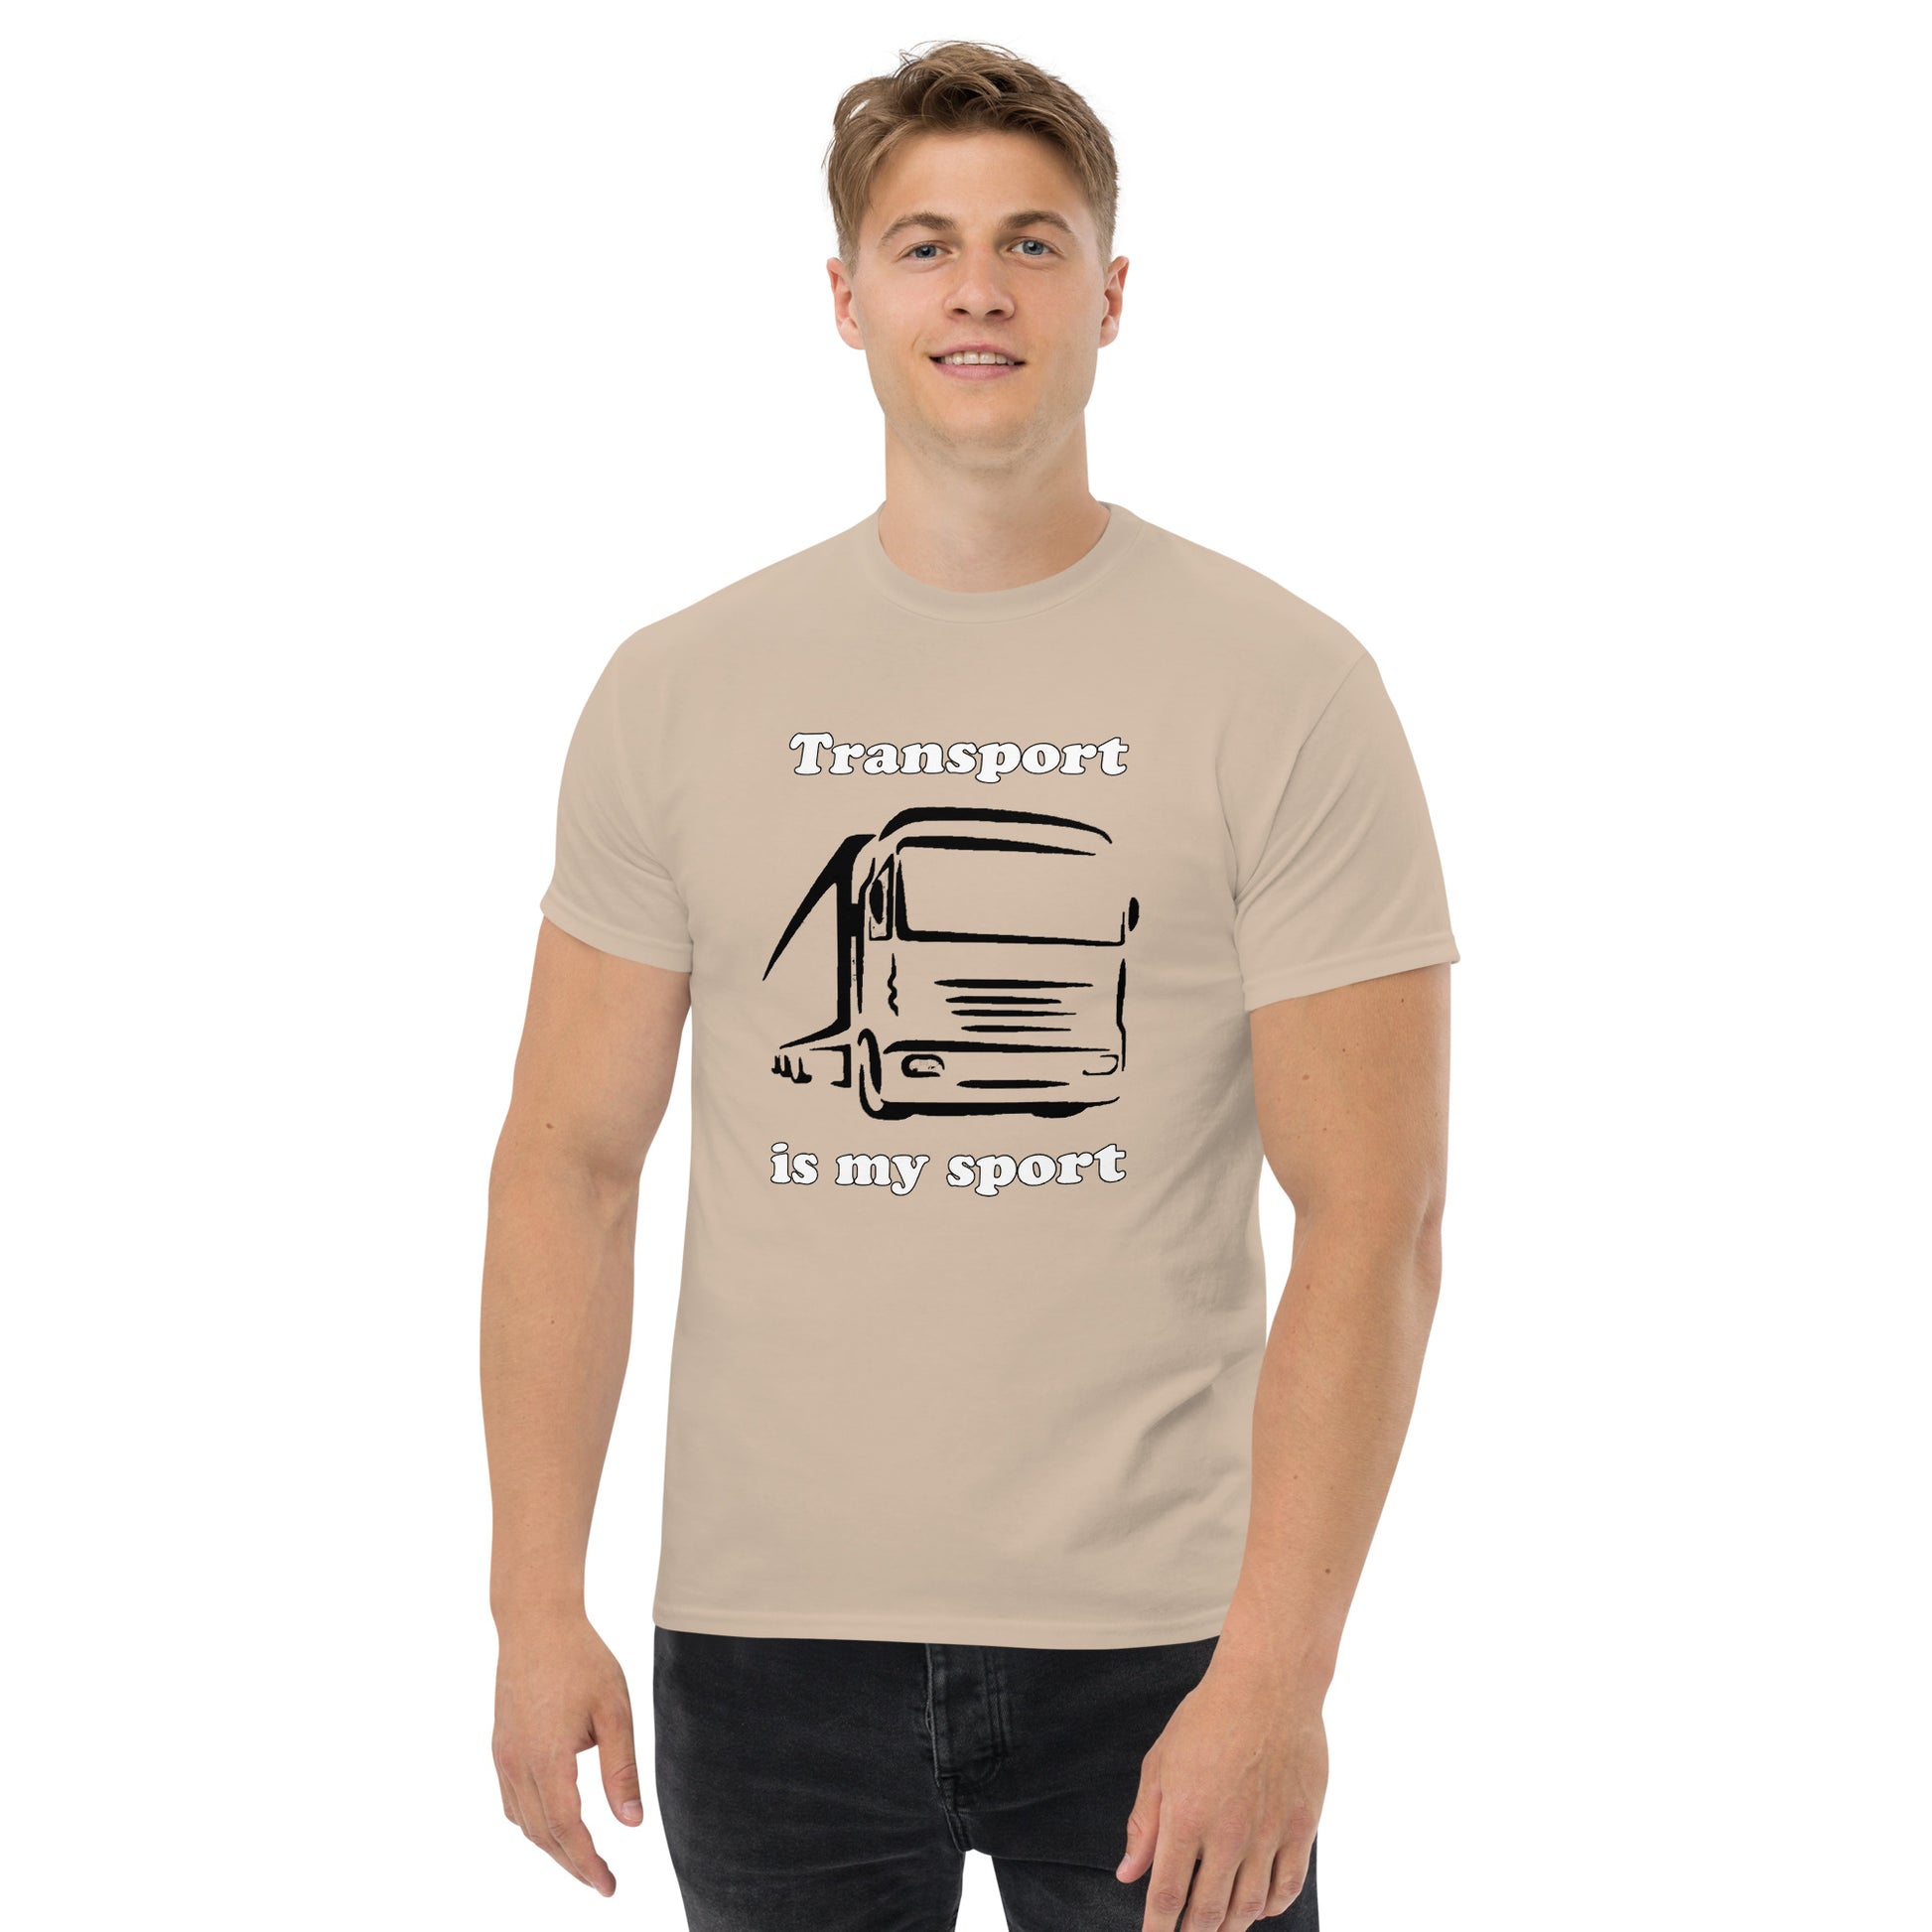 Man with sand t-shirt with picture of truck and text "Transport is my sport"